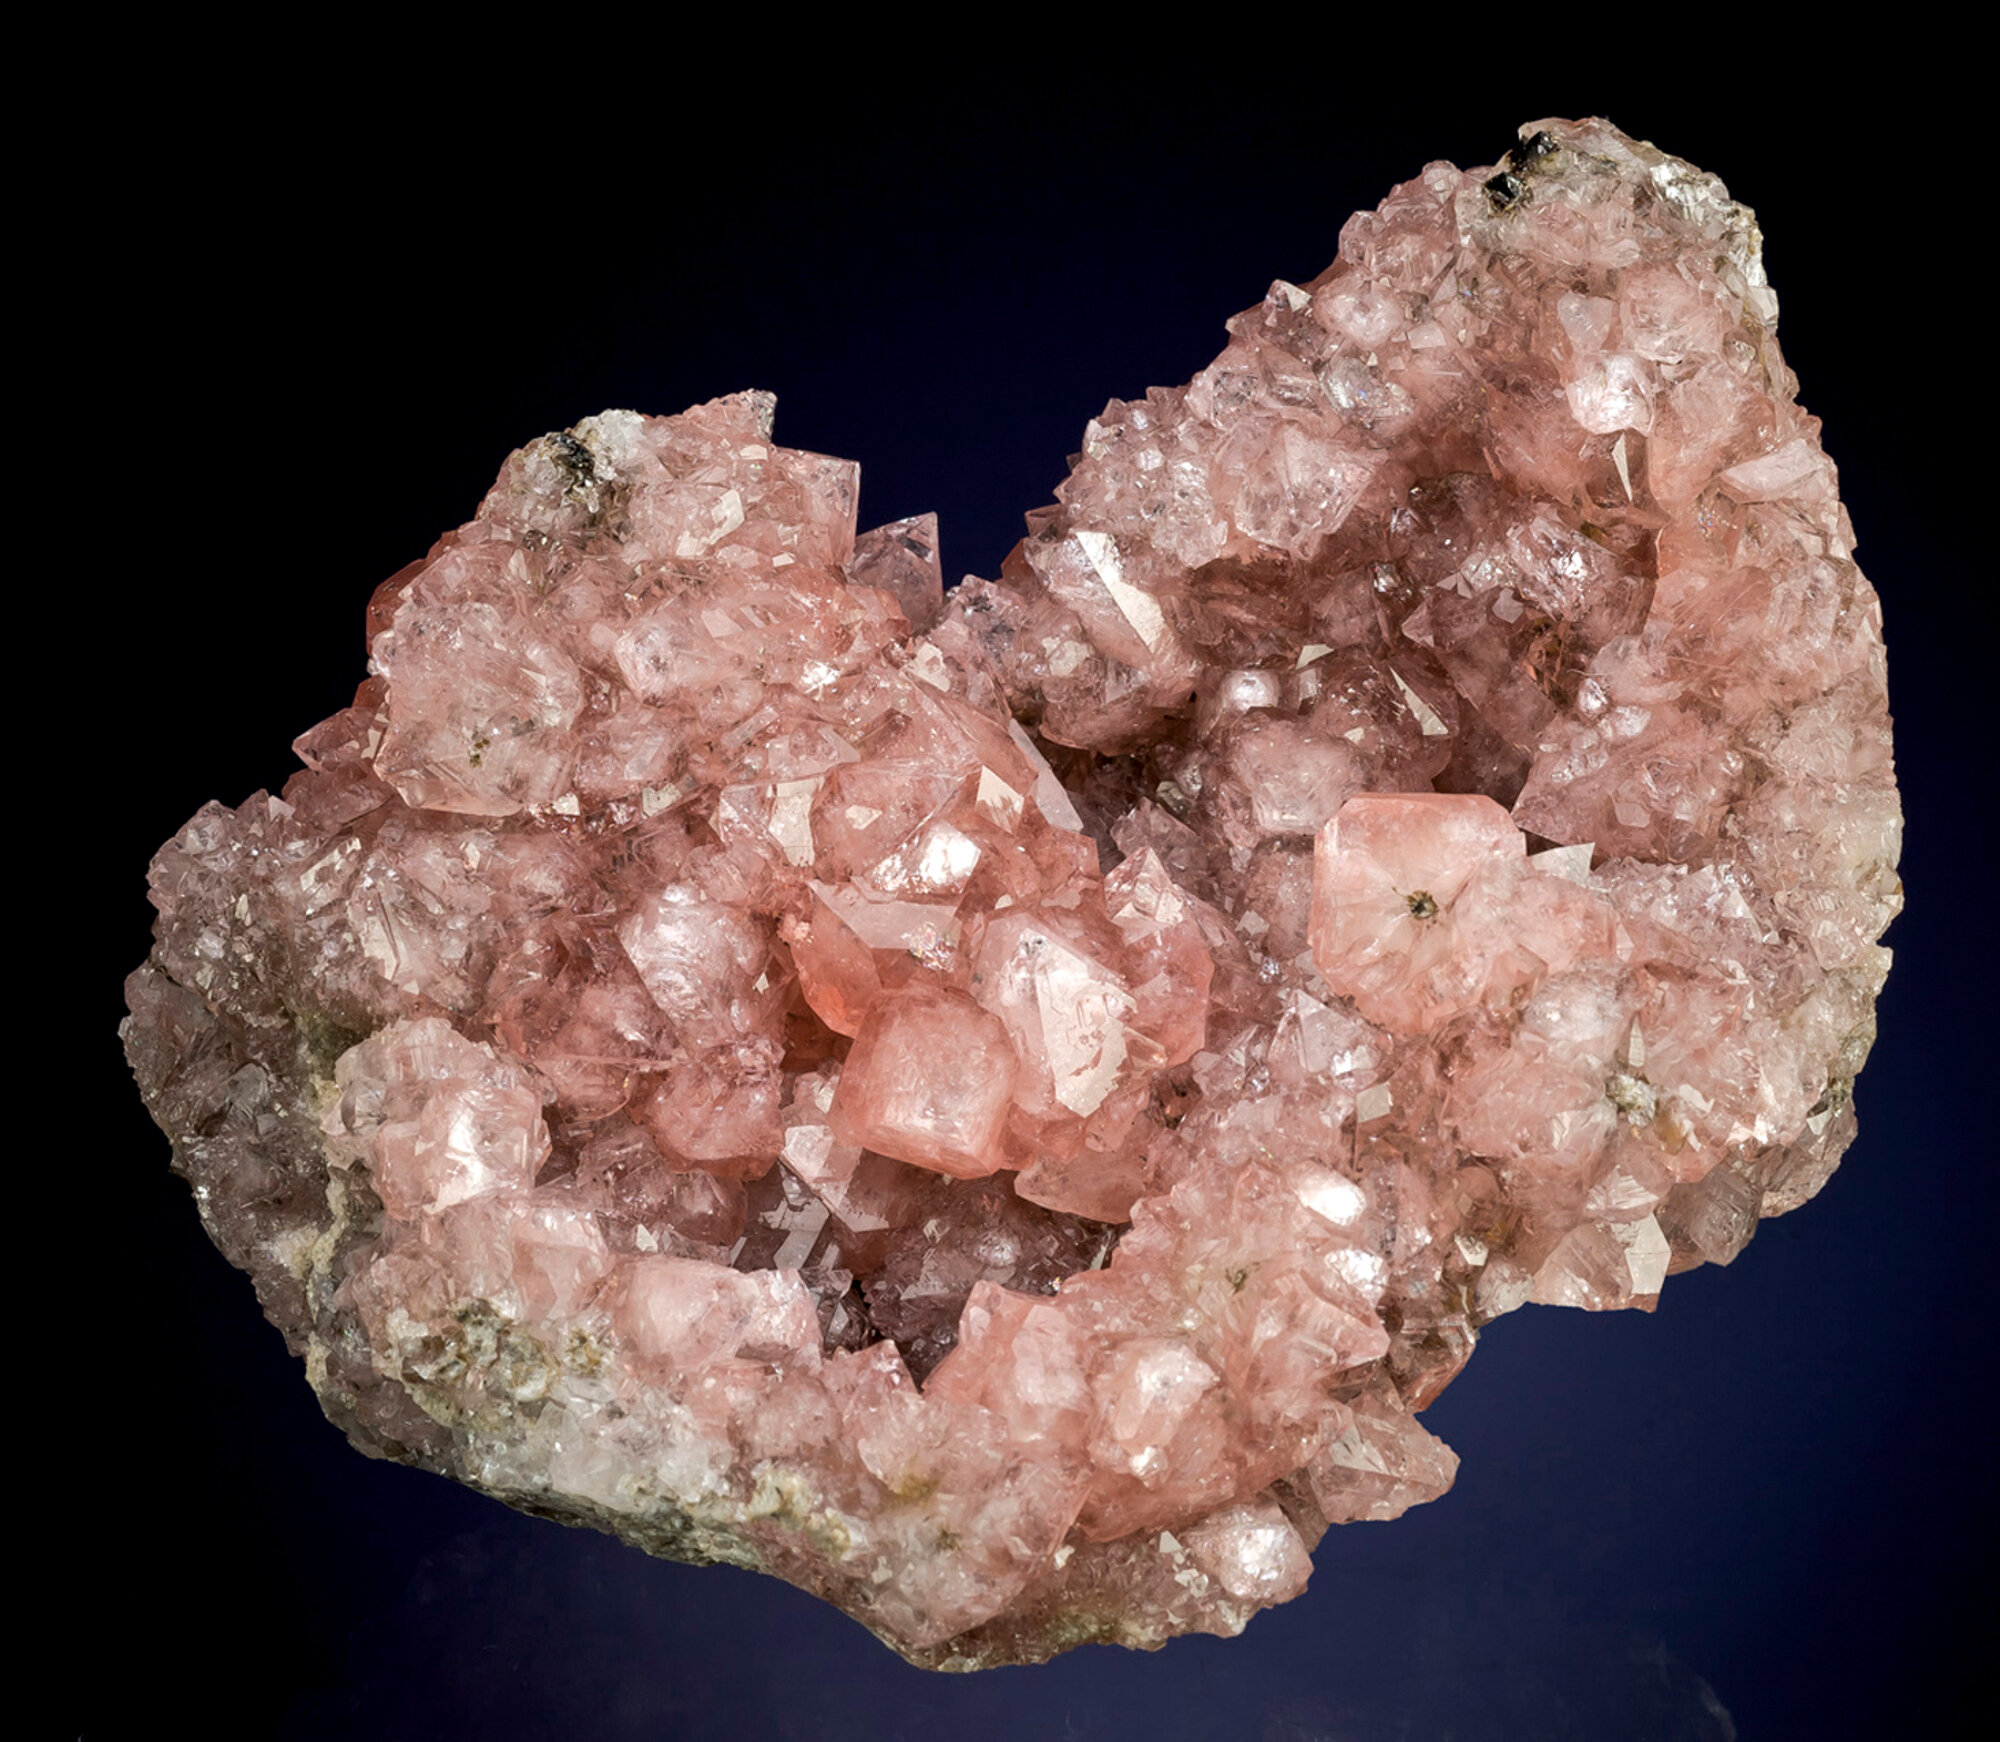  Fluorapophyllite-(K), 11 cm, from the No. 2 tunnel, Chaobuleng mine, Dongwuzhumuqin County, Xilinguole Prefecture, Inner Mongolia Autonomous Region, China. Found in 2011.  